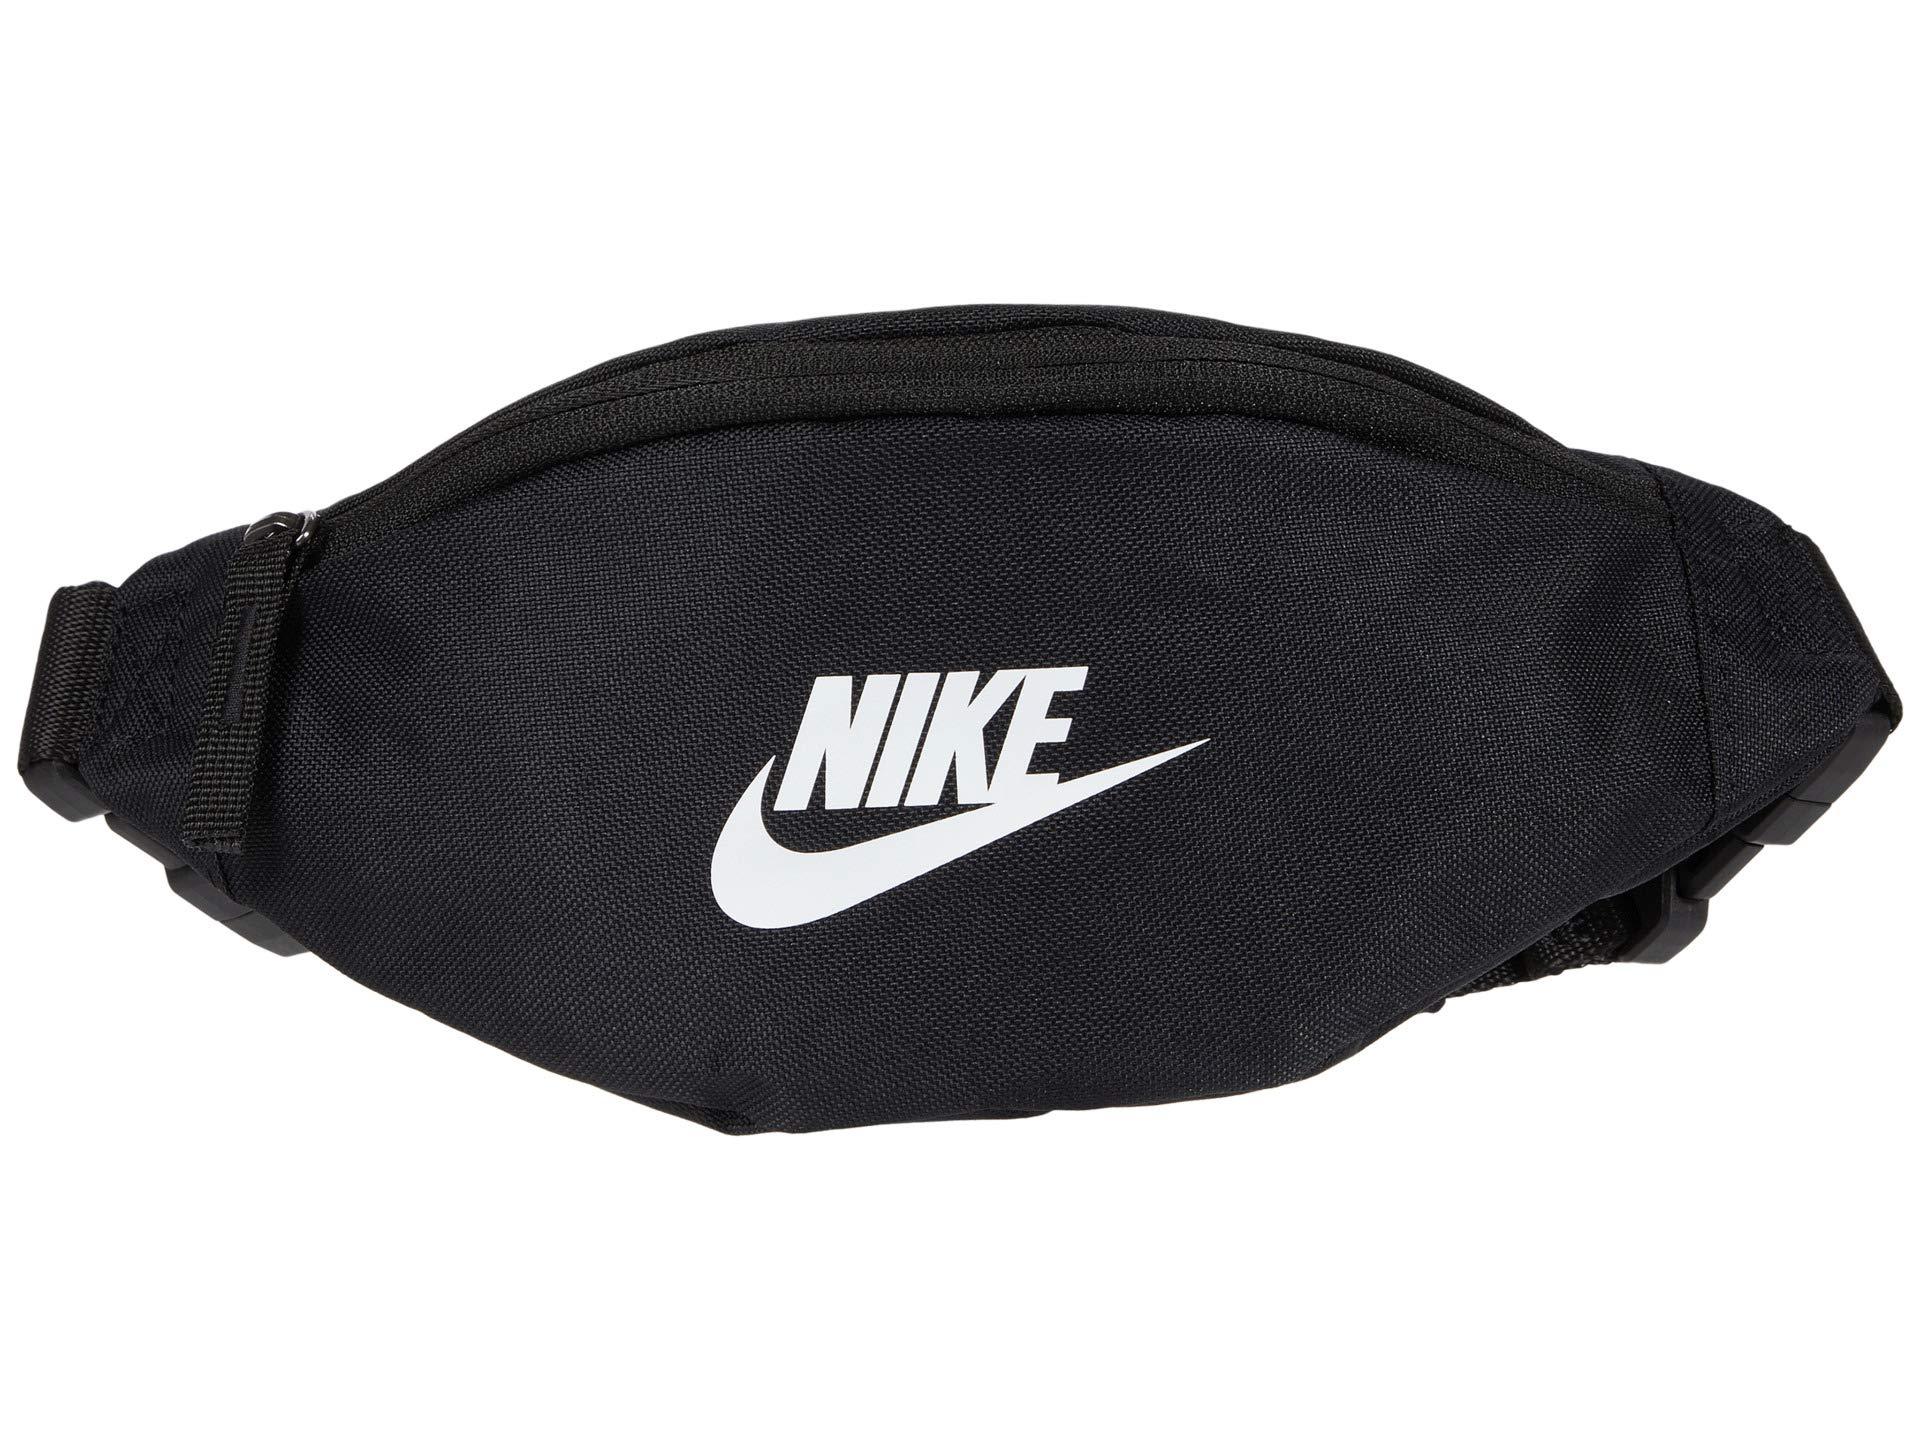 Nike Synthetic Heritage Small Fanny Pack in Black - Lyst